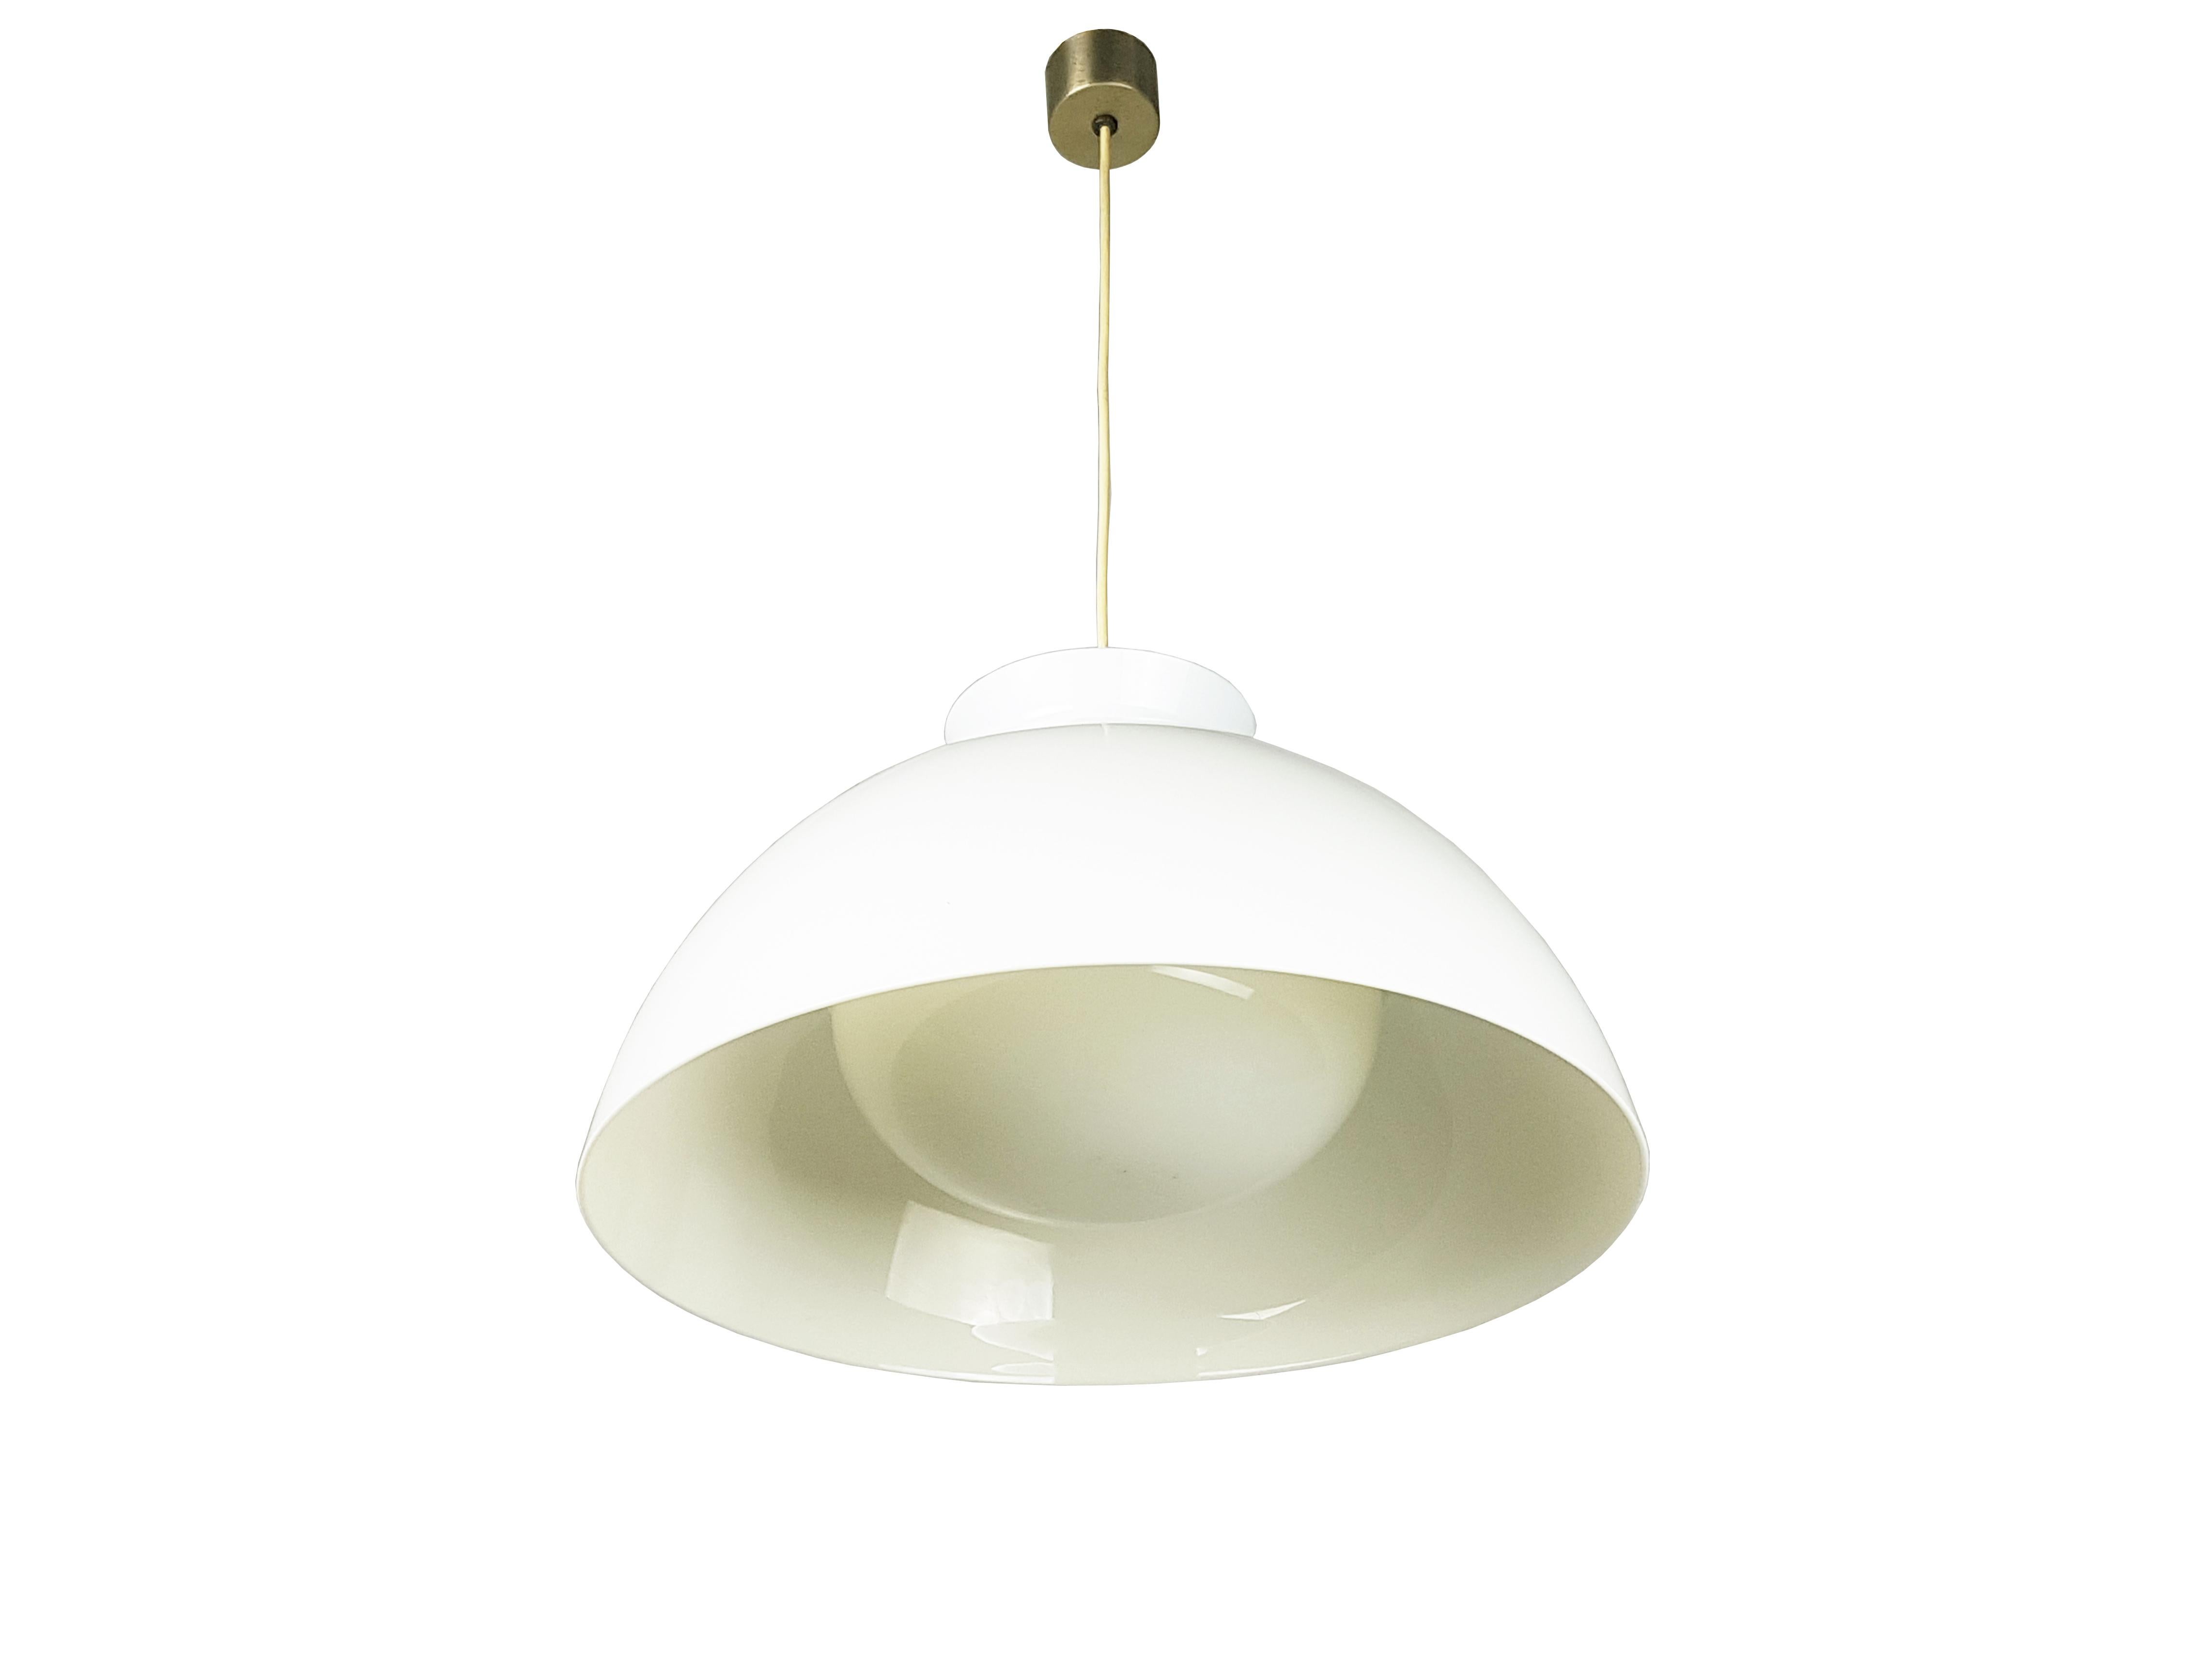 Rare pendant lamp design by Achille and Pier Giacomo Castiglioni in 1959.
White methacrylate double shades with nickel plated brass finishes.
Original working wiring with 1 E27 lamp socket.
The lamp is made up of 2 main lampshades: a small one